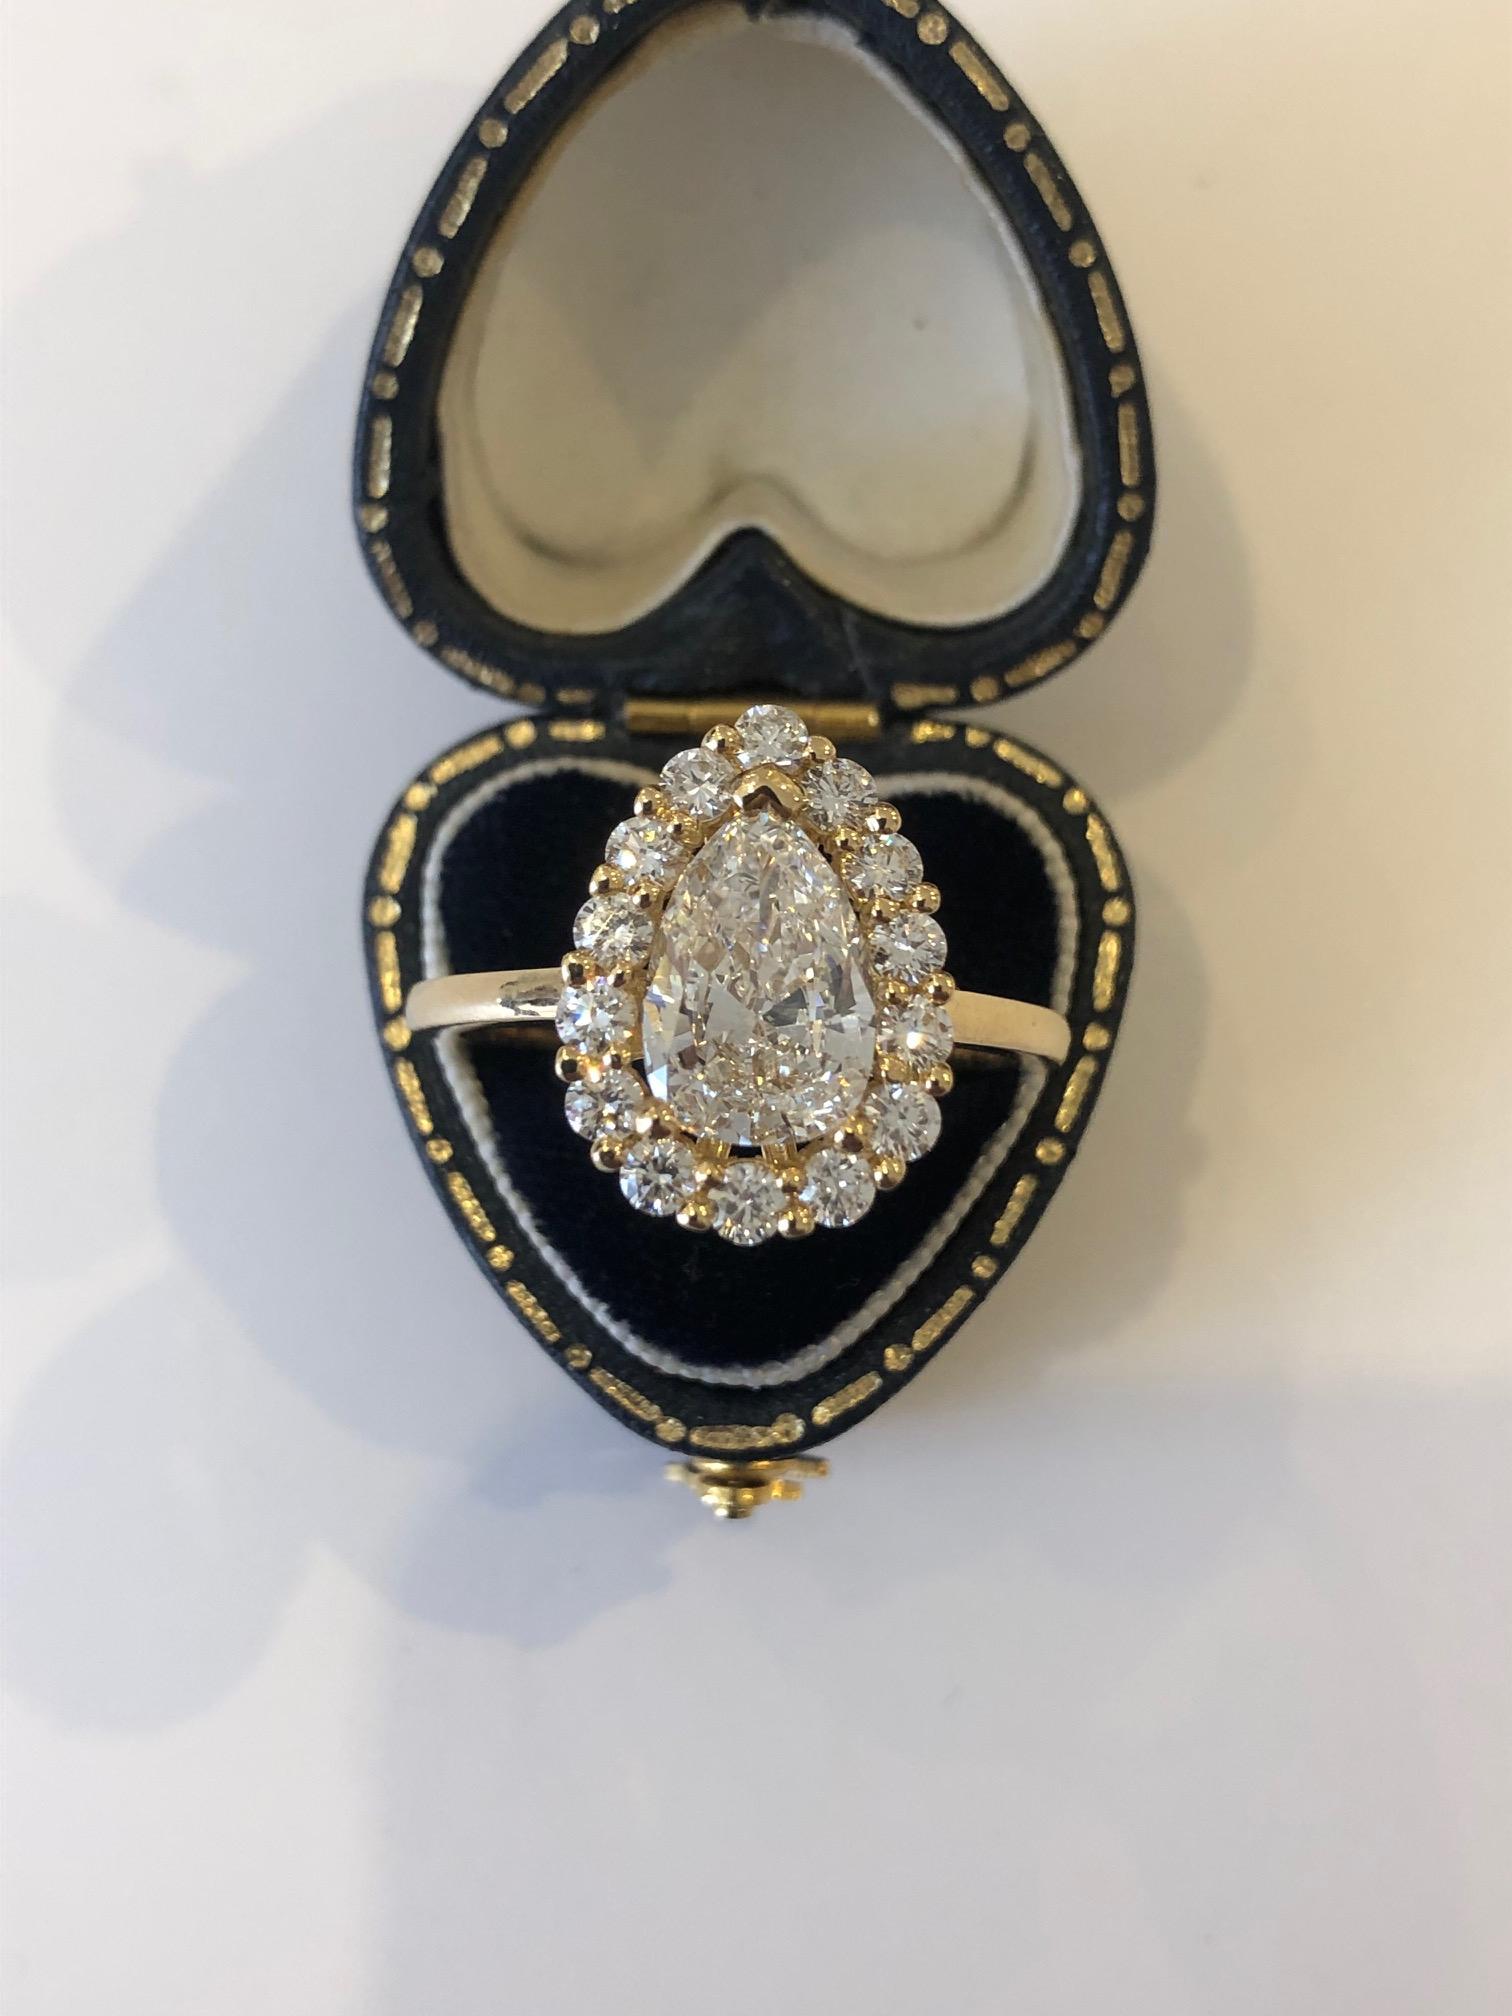 French Diamond Cluster Ring with a 2.01 carat Pear Shape Diamond Certified GIA 
A French diamond cluster ring set in hallmarked 18ct yellow gold. The ring centres a 2.01 carat pear shaped diamond graded by the GIA as G colour and VS1 clarity.
The